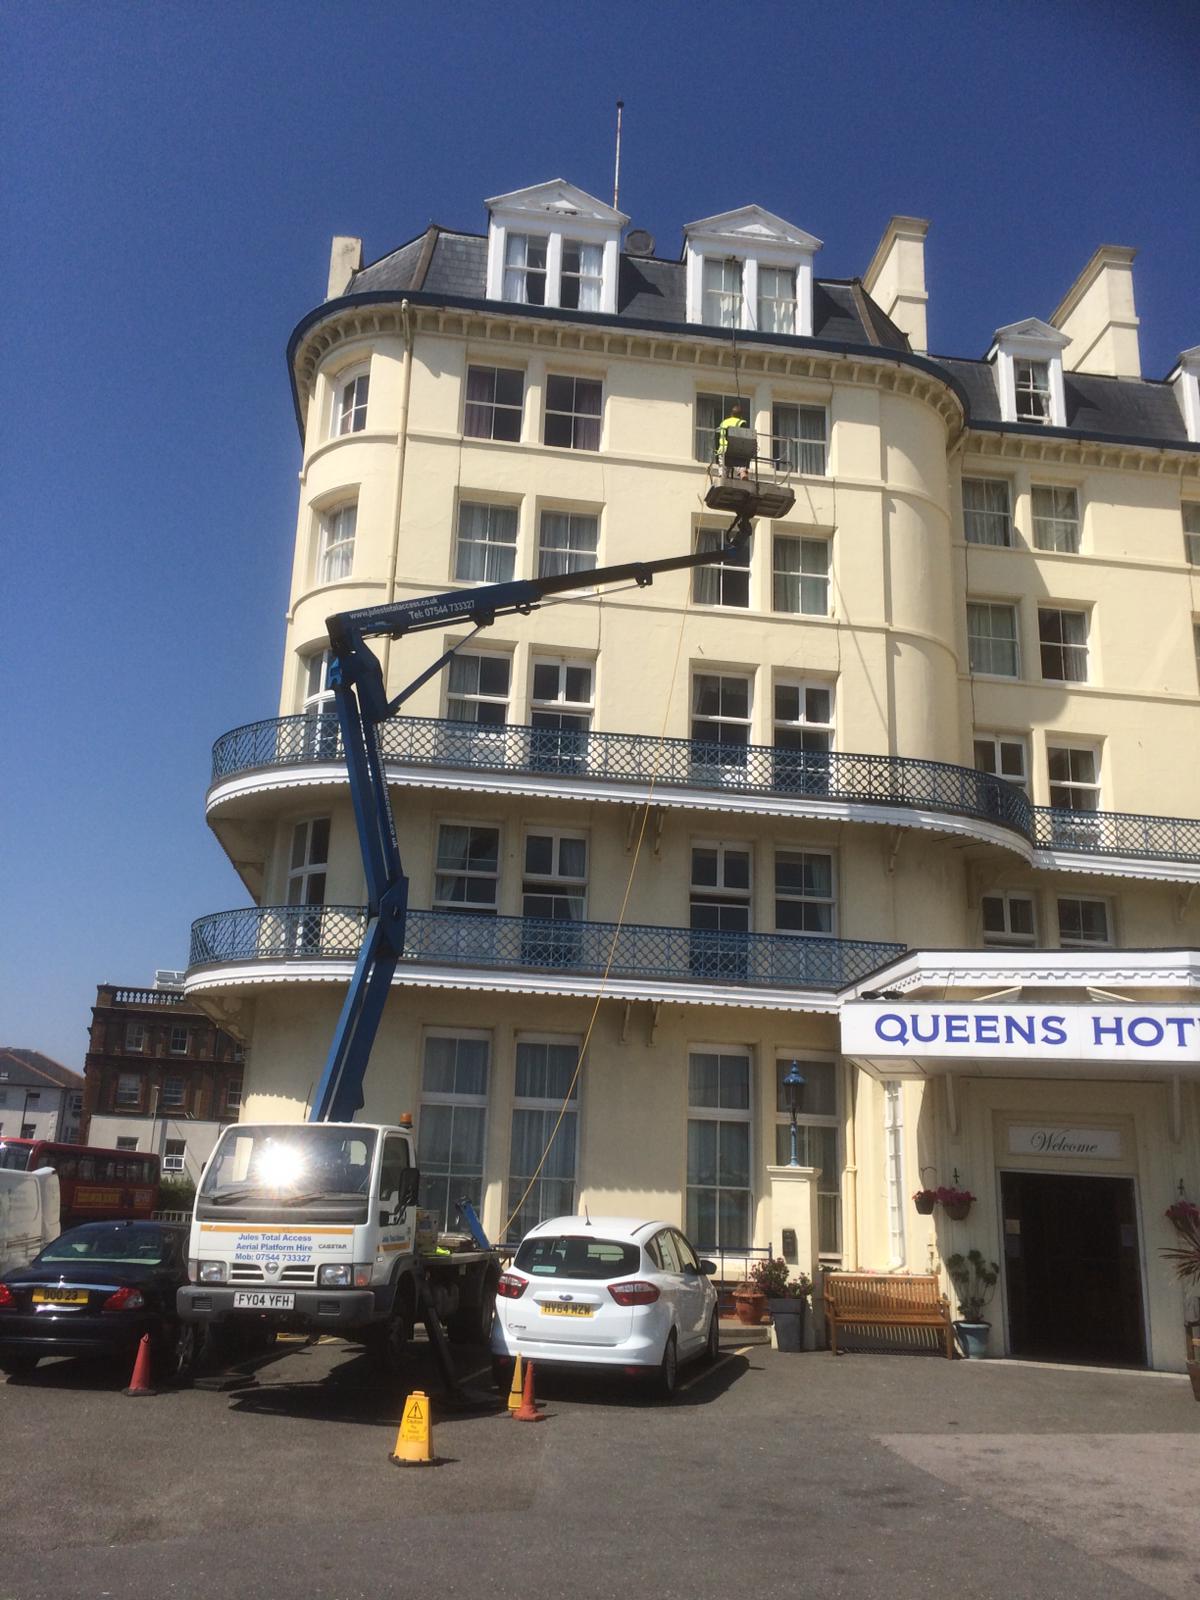 Cleaning windows at Eastbourne hotel